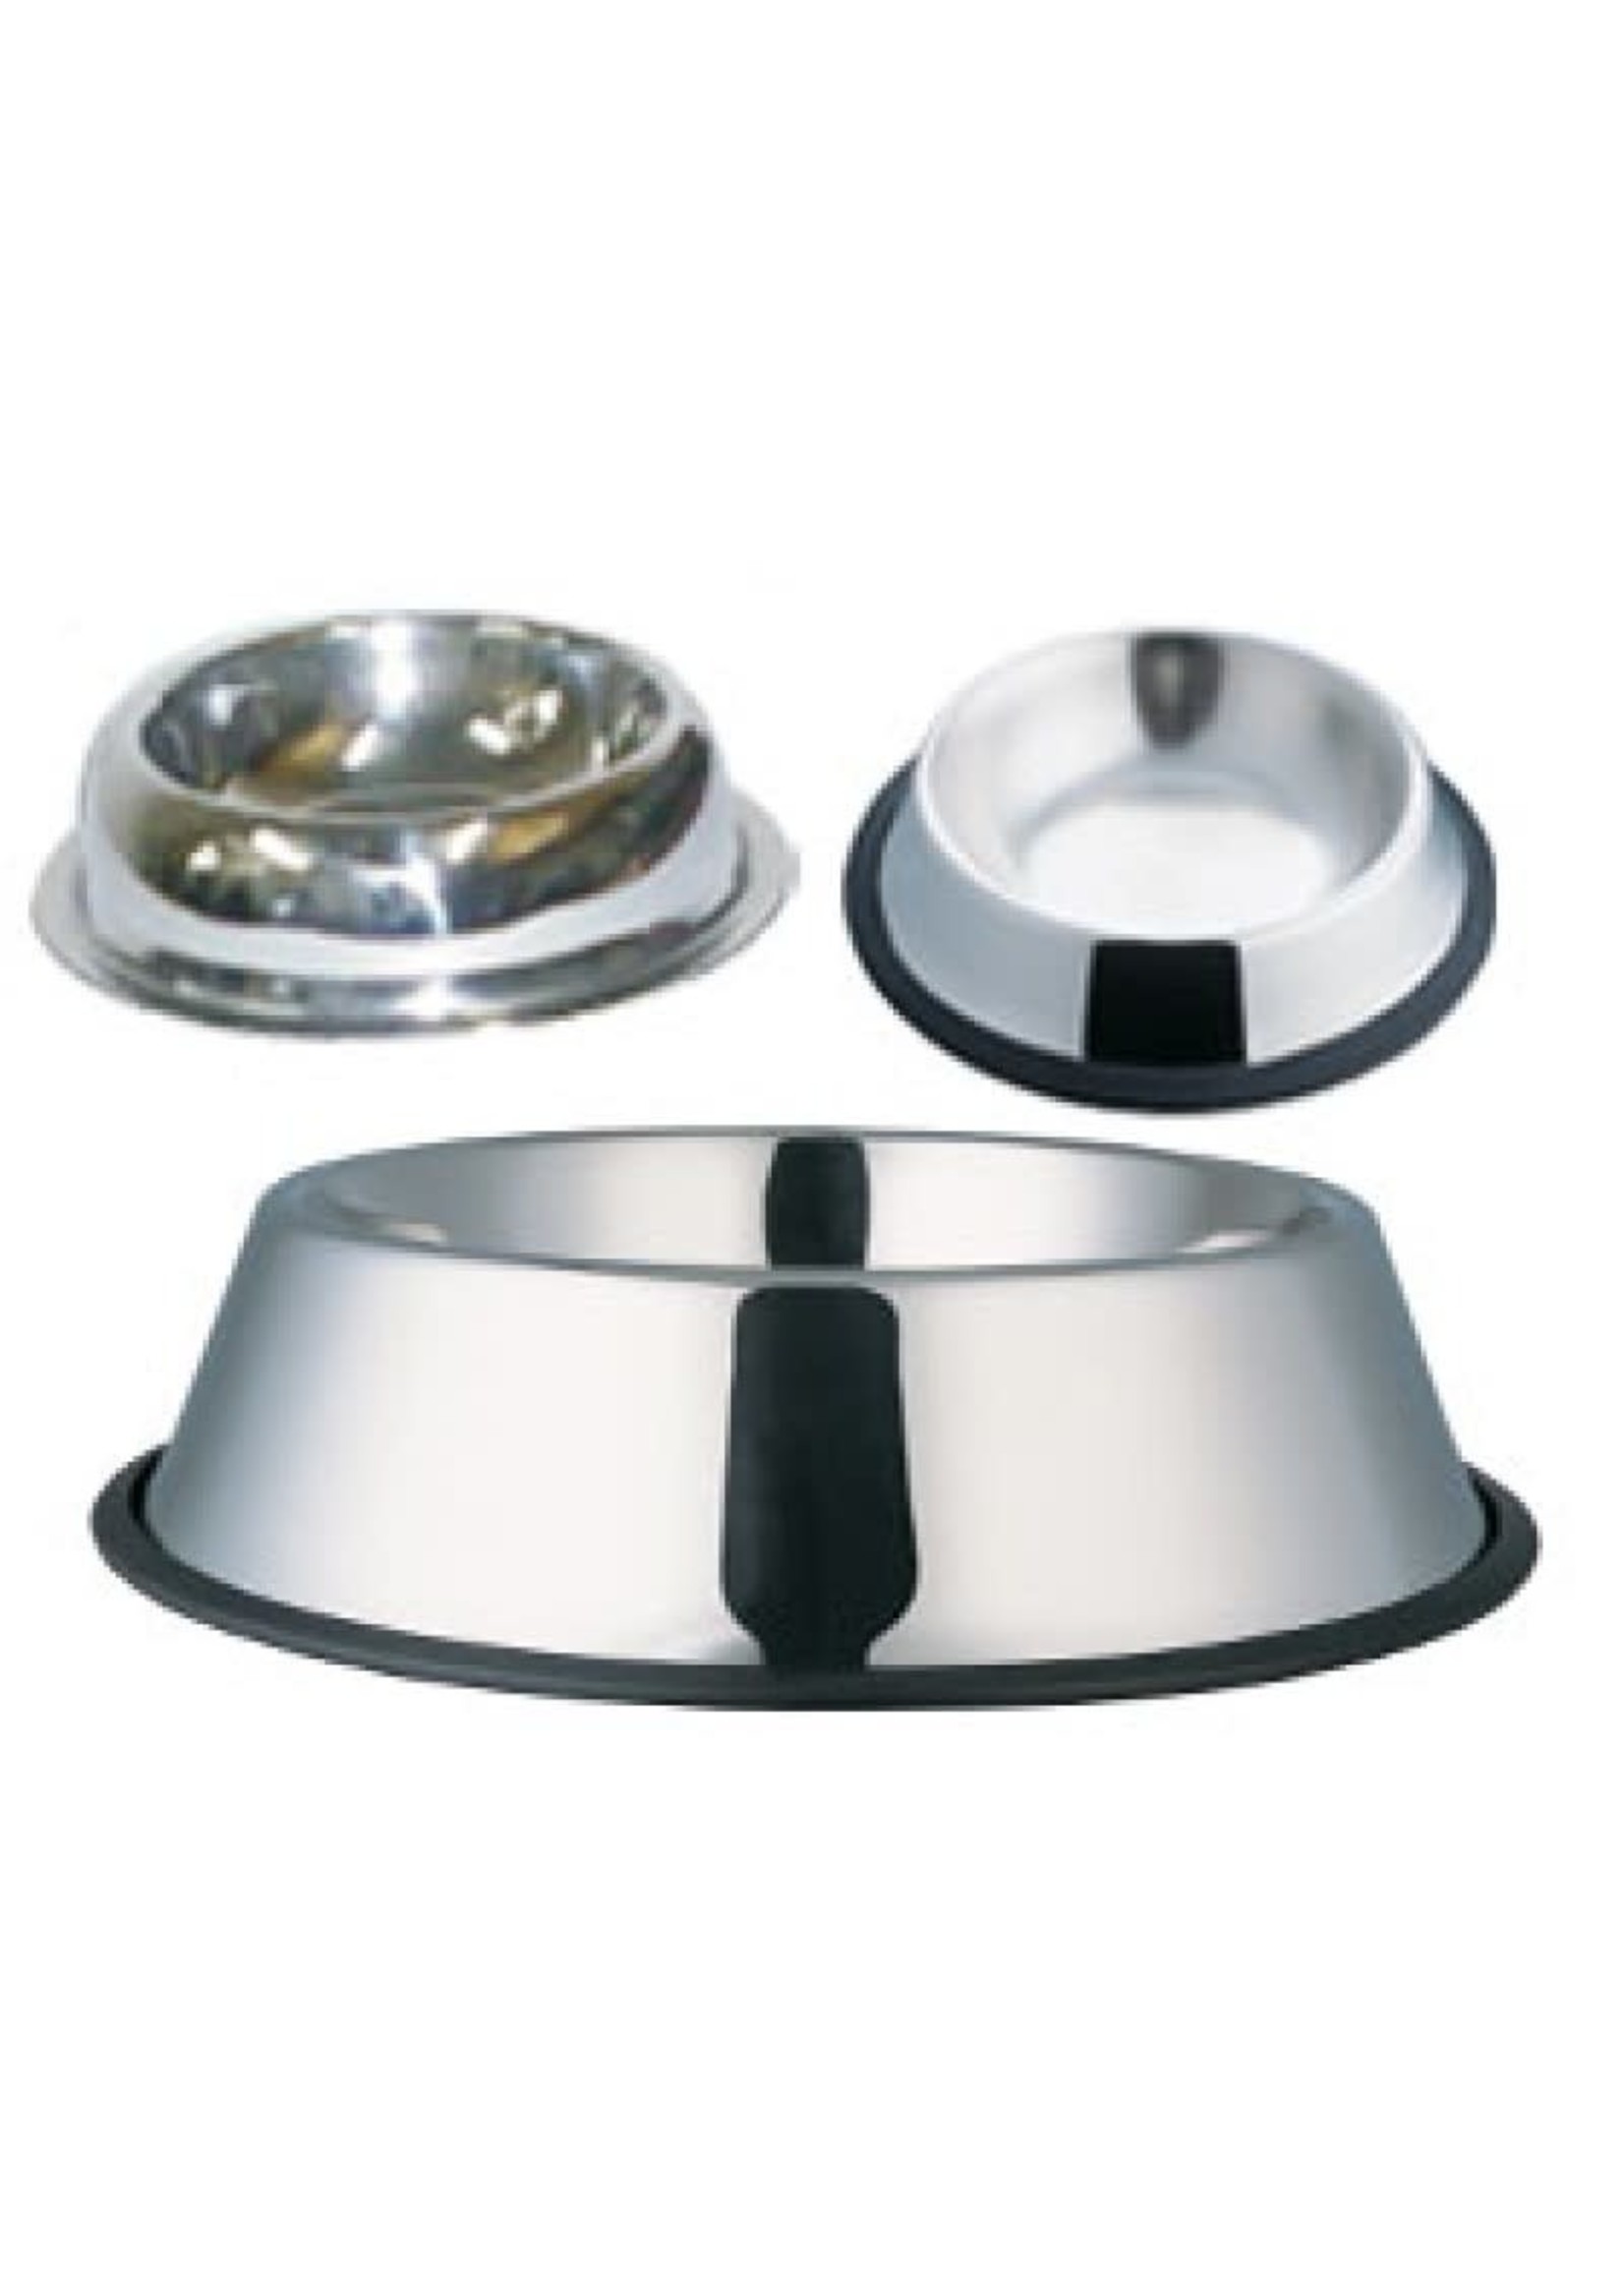 Indipet Stainless Steel Non Tip Bowl 64 oz